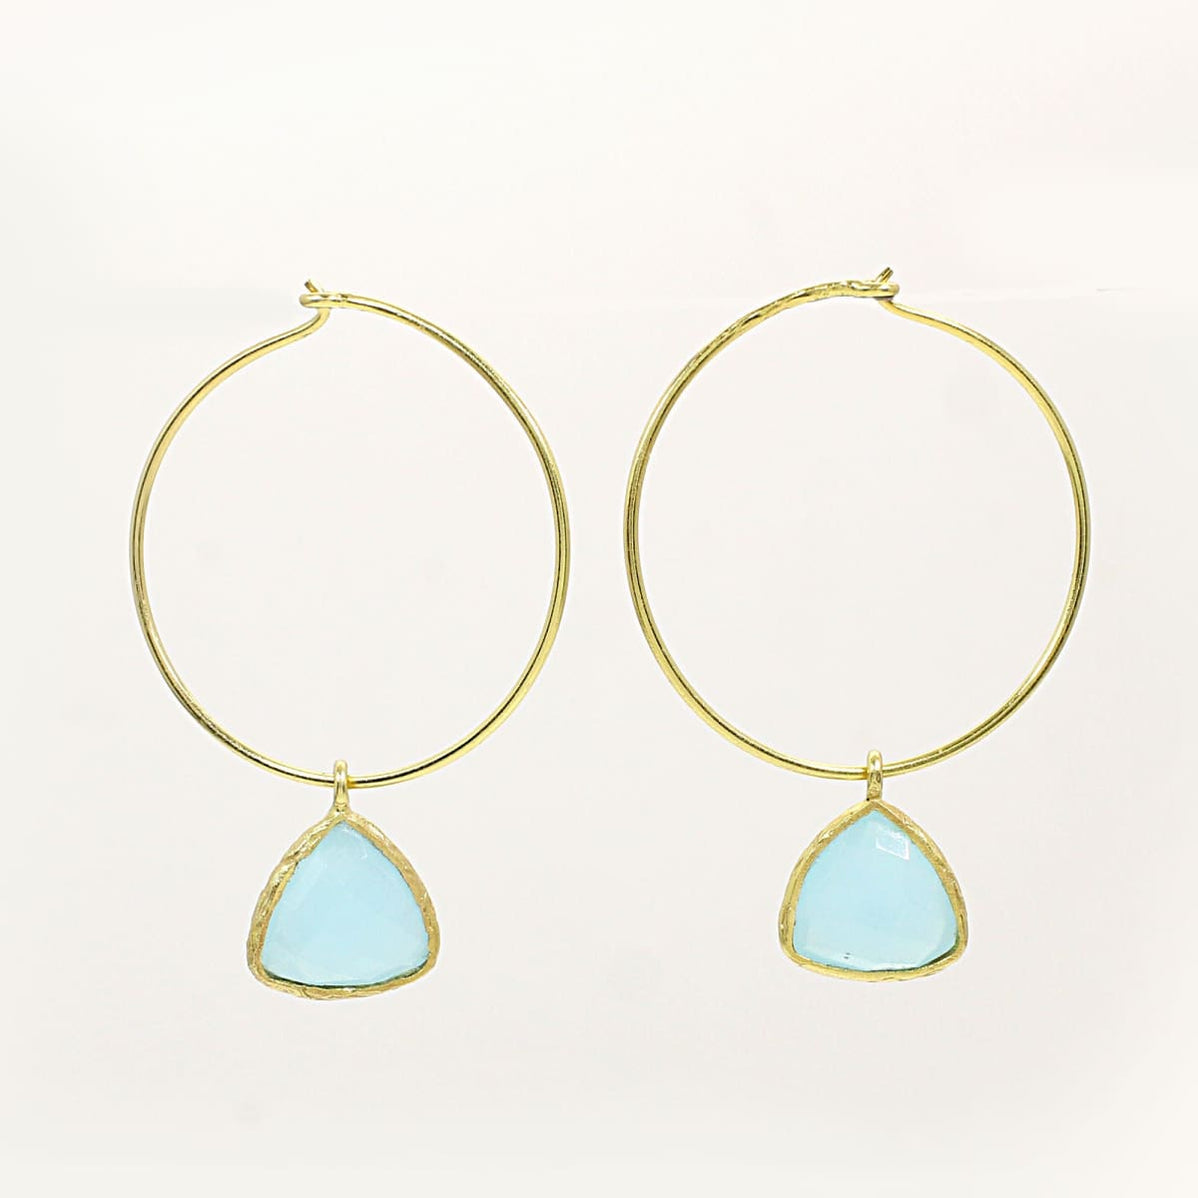 Discovered | Handmade Earrings | Online Store — Page 2